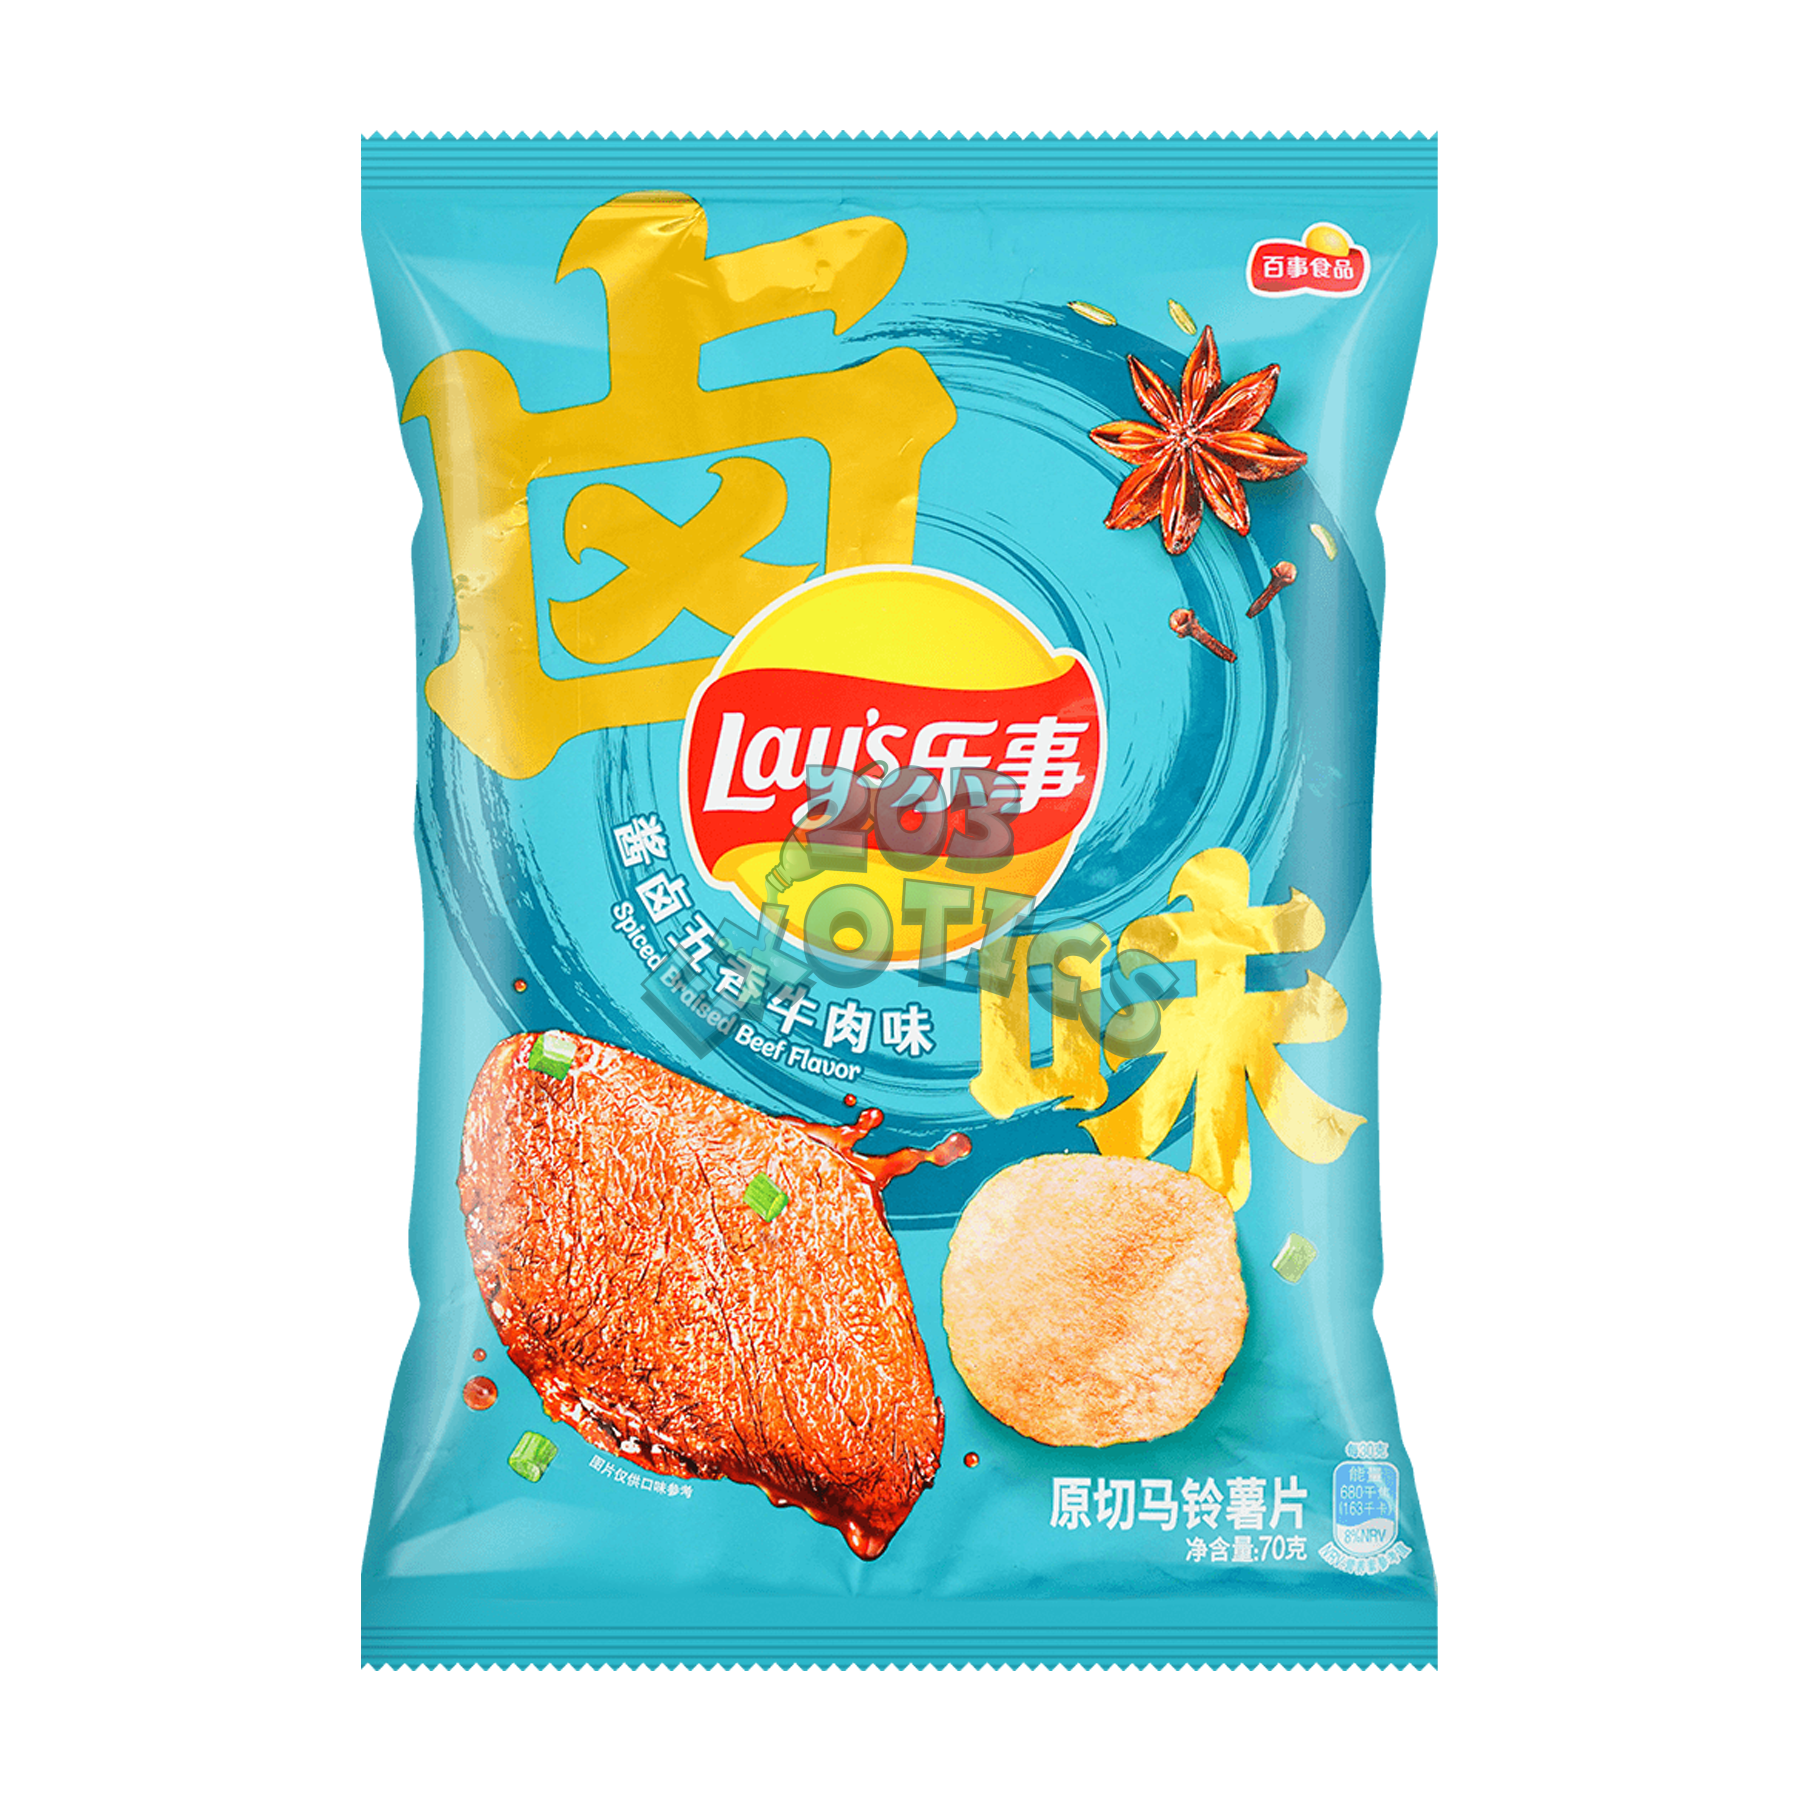 Lays Spiced Braised Beef Flavored Chips (70G)